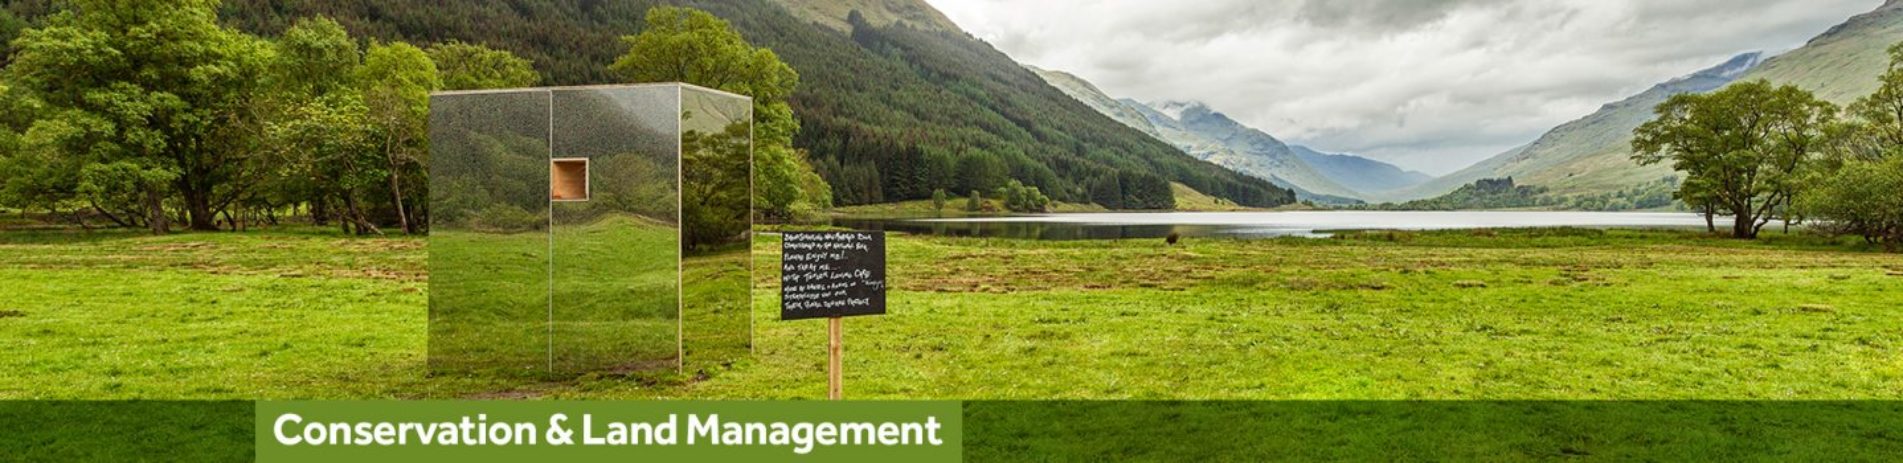 image-of-loch-doine-text-reads-conservation-and-land-management